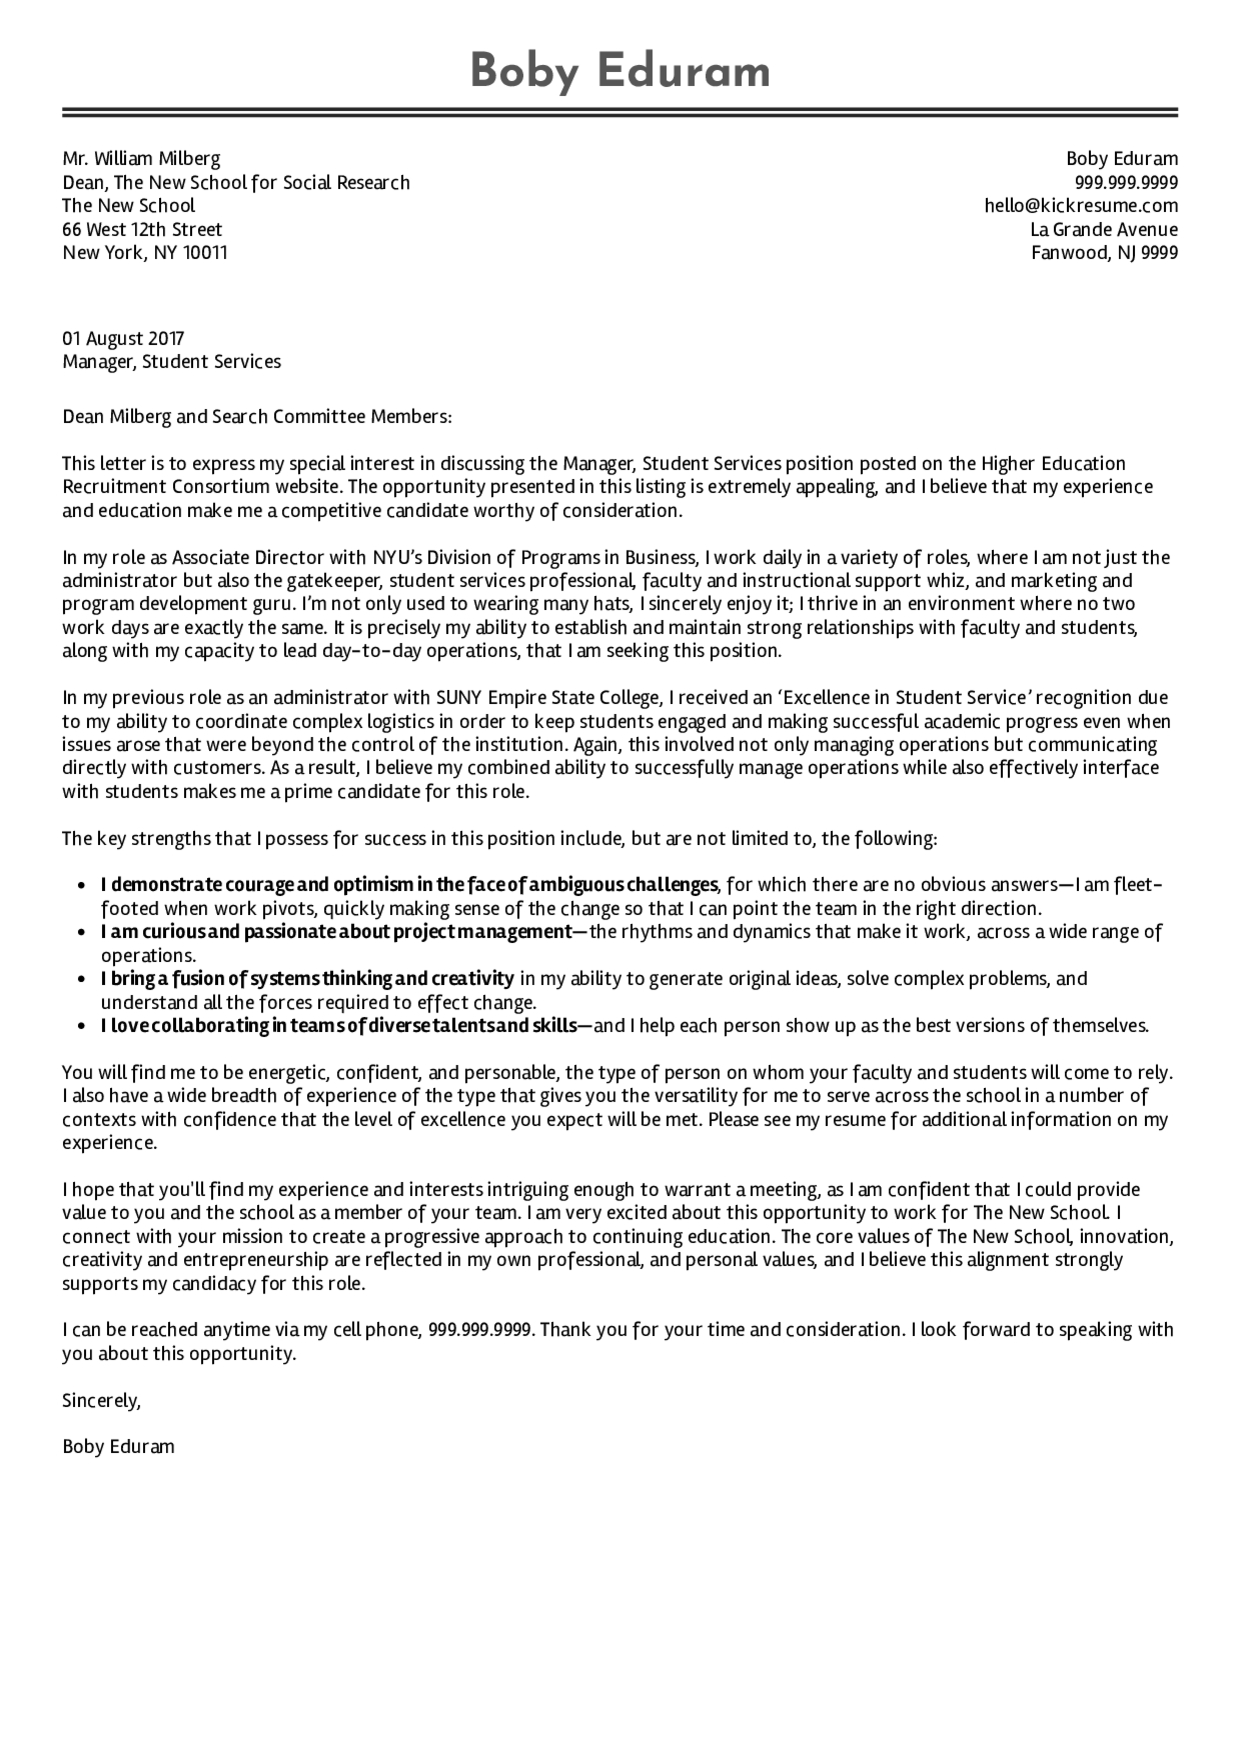 assistant dean of students cover letter